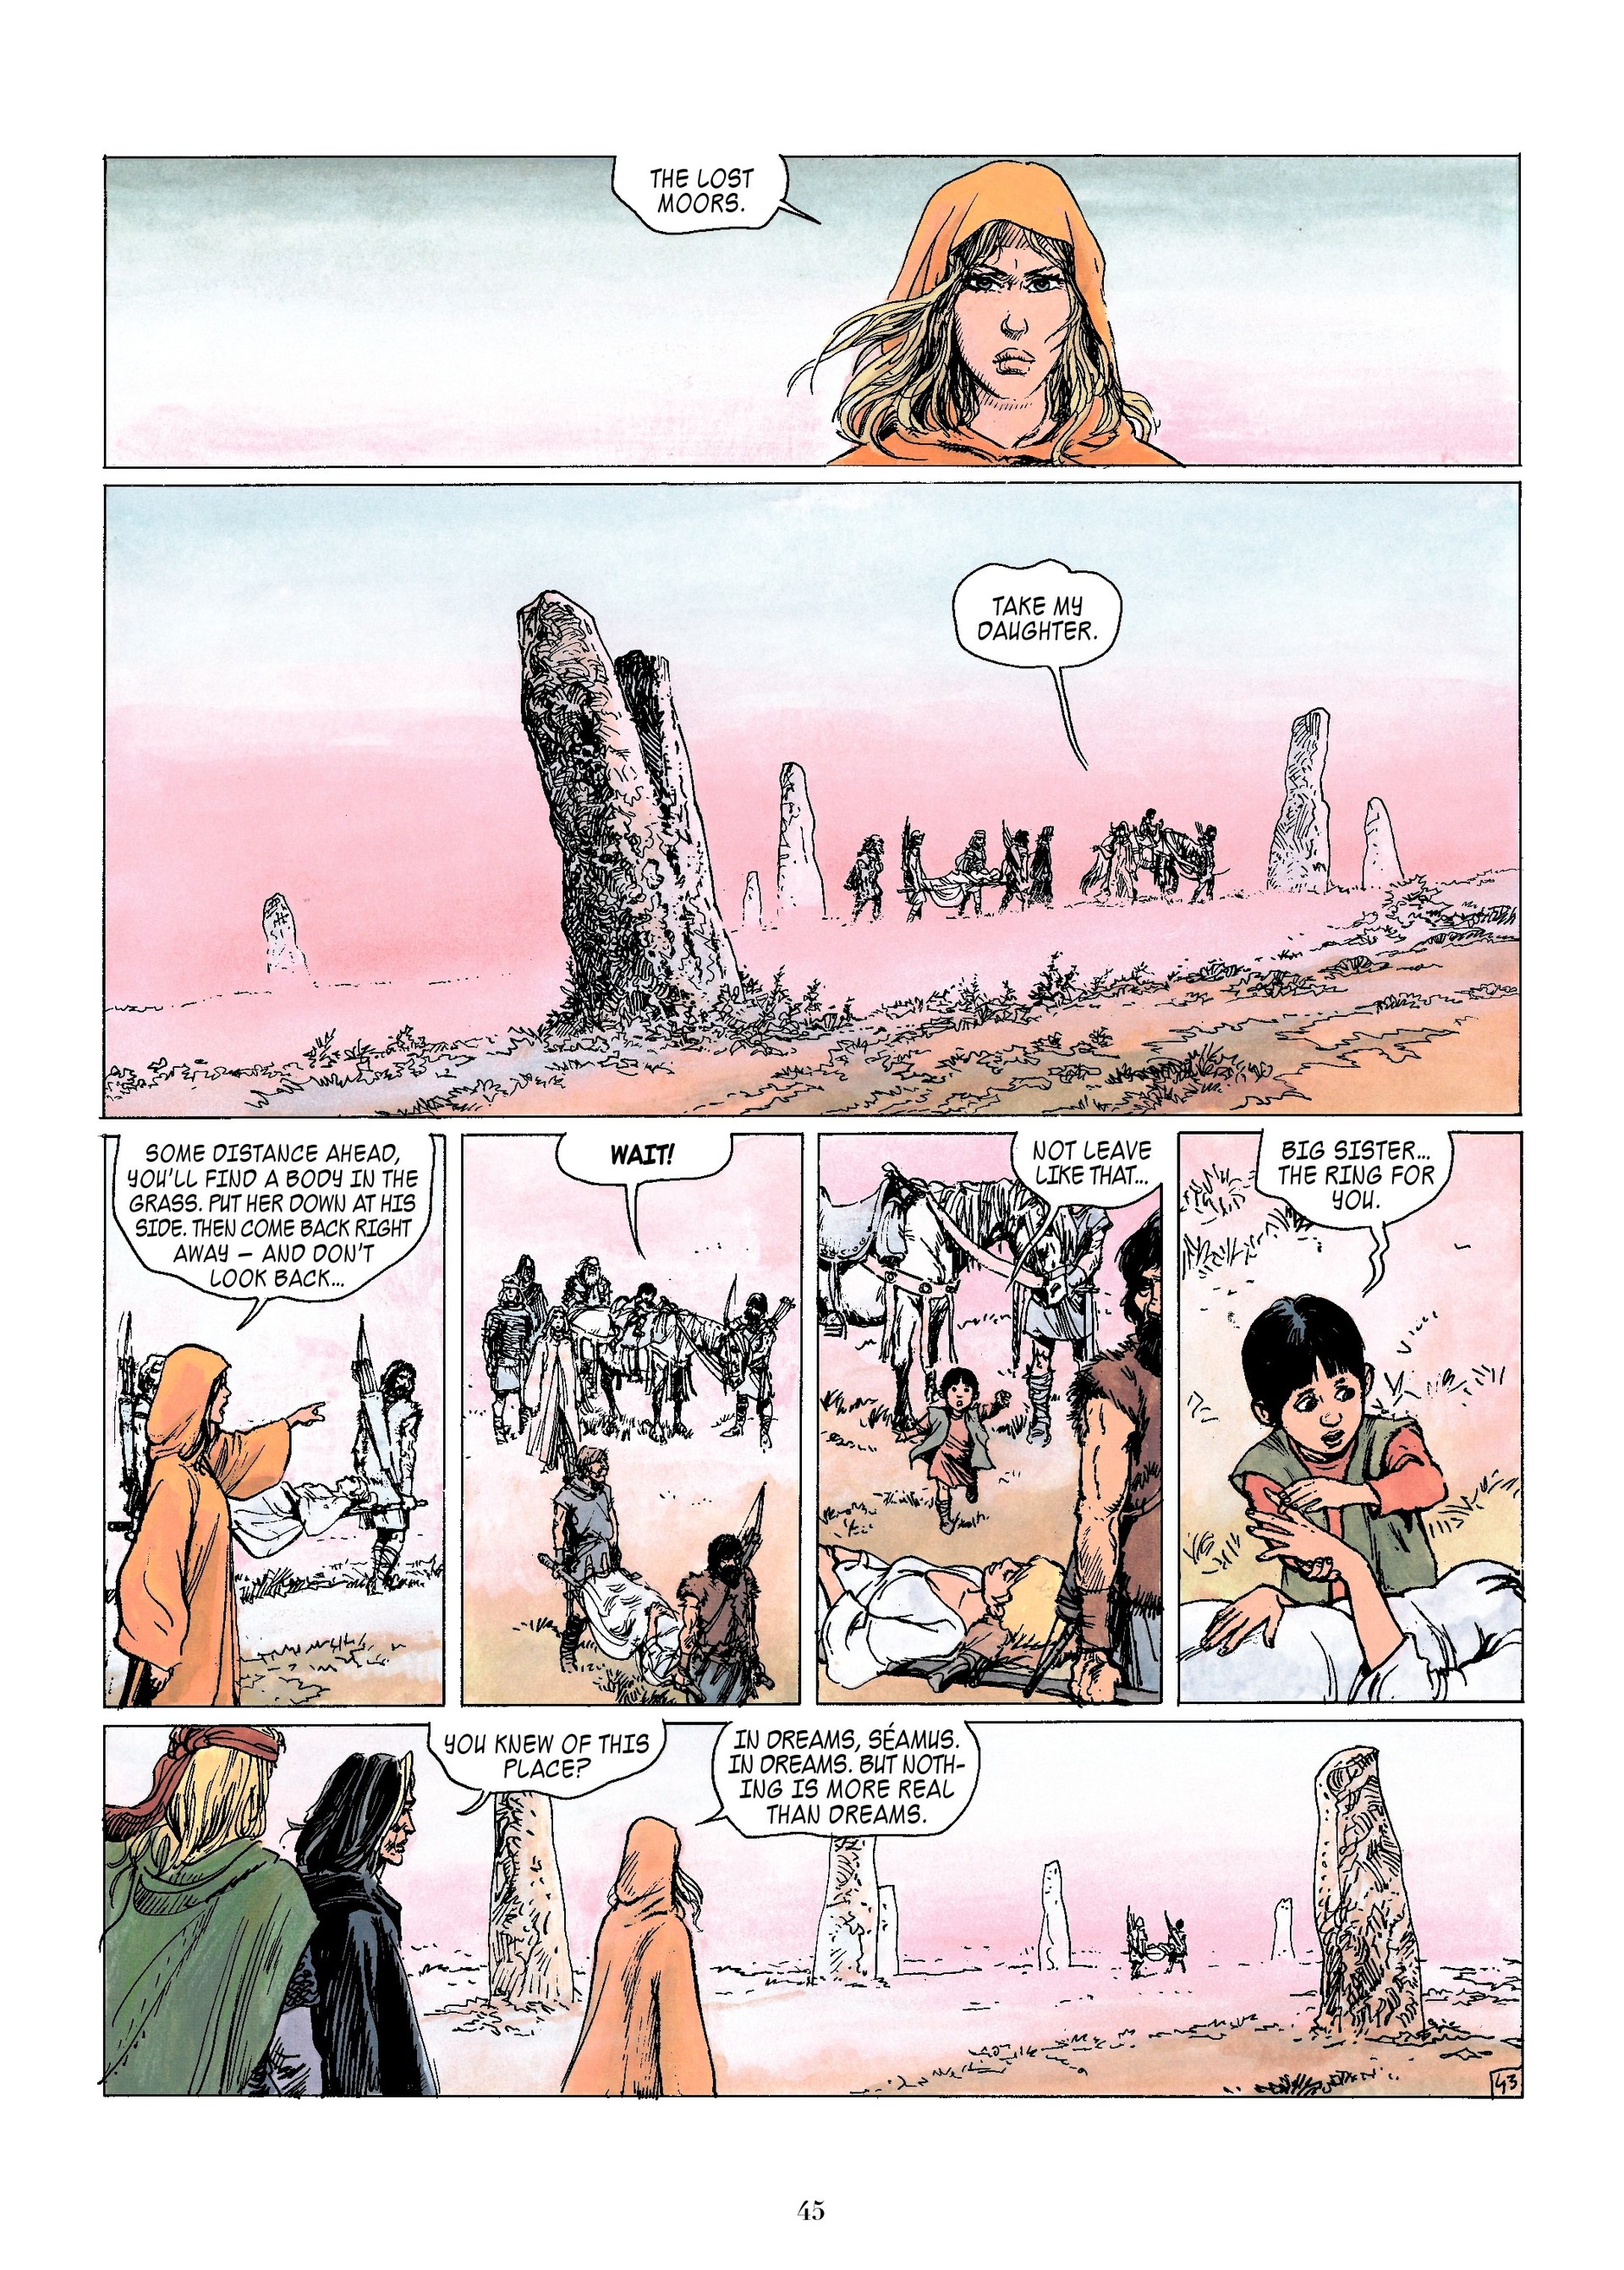 Read online Lament of the Lost Moors comic -  Issue #4 - 45